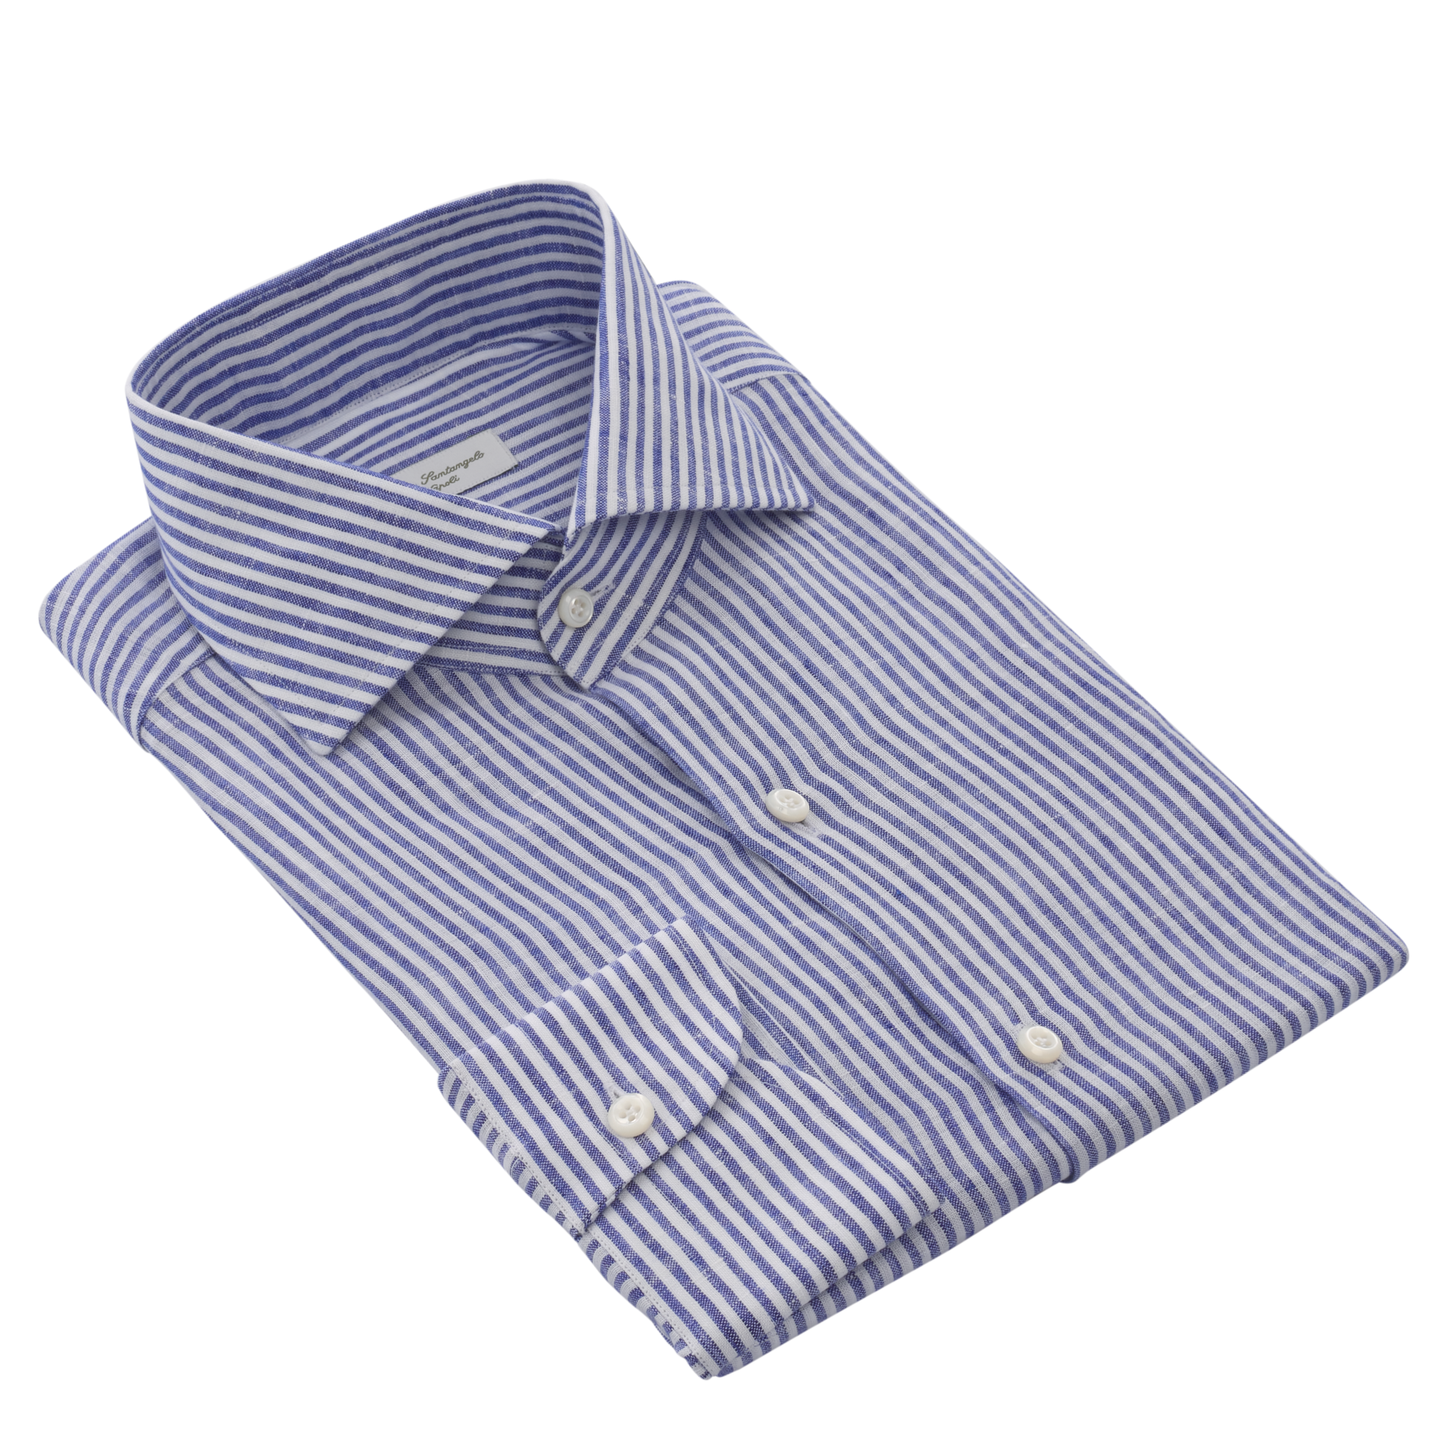 Striped Linen Shirt in Dark Blue and White